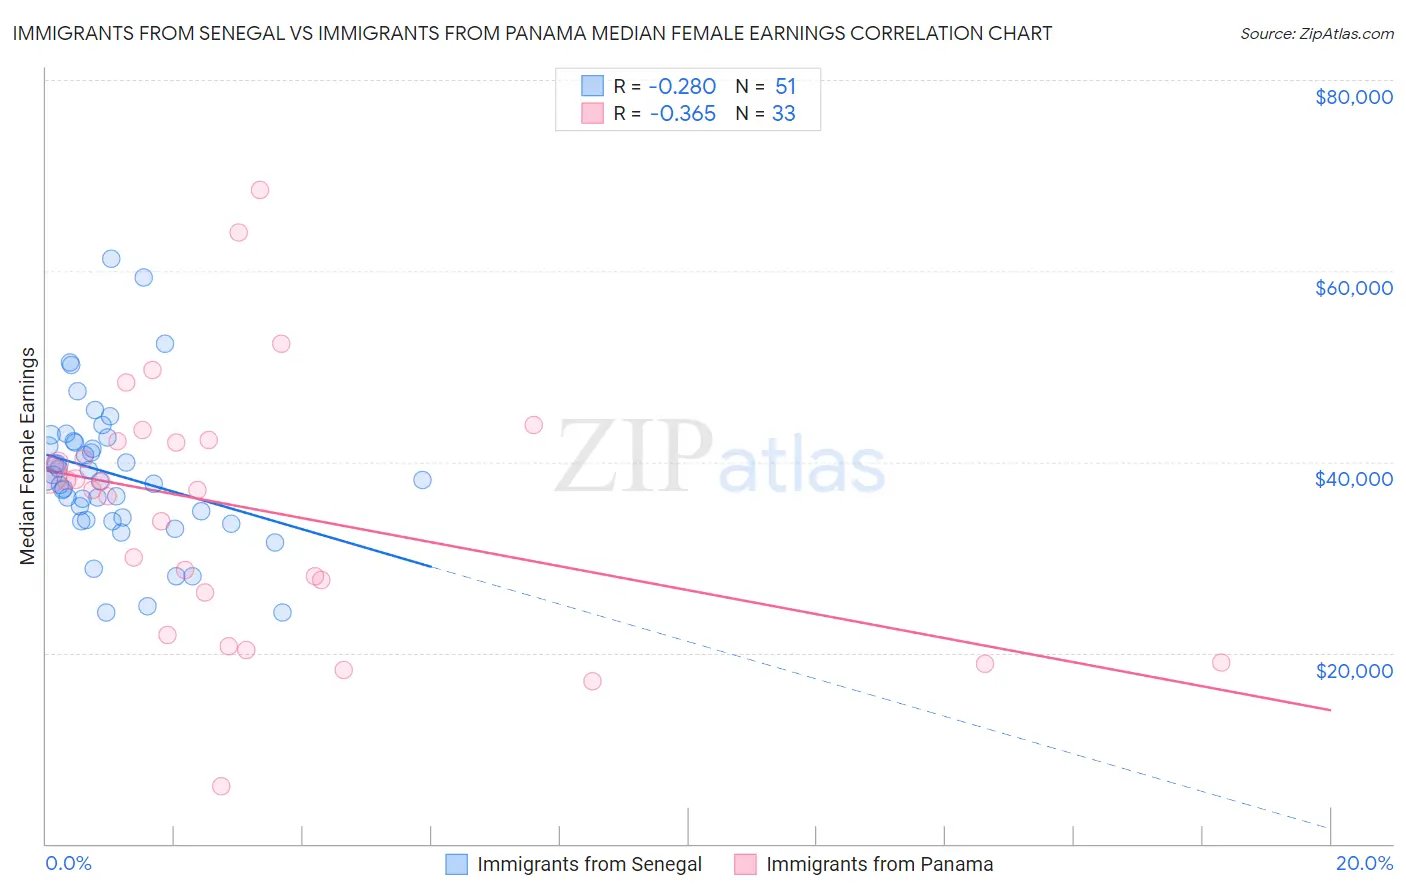 Immigrants from Senegal vs Immigrants from Panama Median Female Earnings